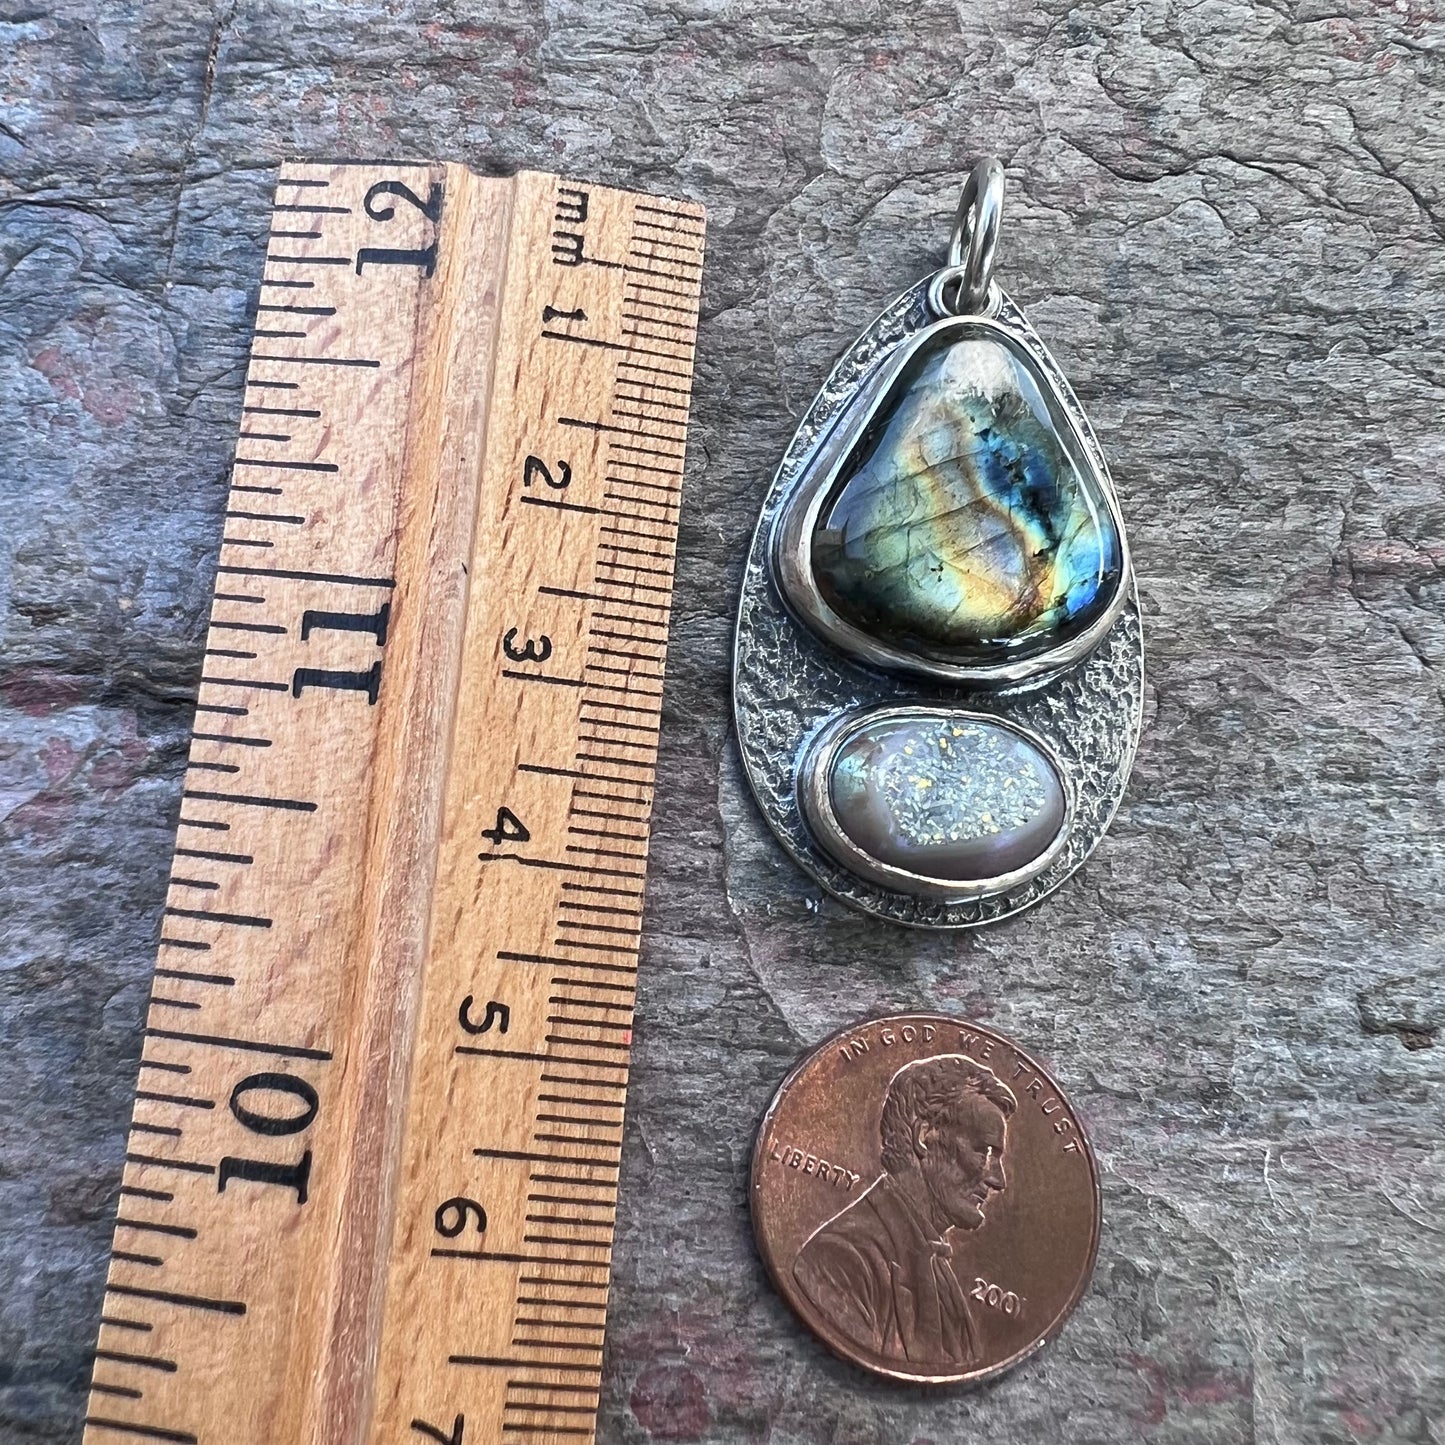 Labradorite and Agate Druzy Sterling Silver Pendant - One-of-a-Kind Handmade Pendant